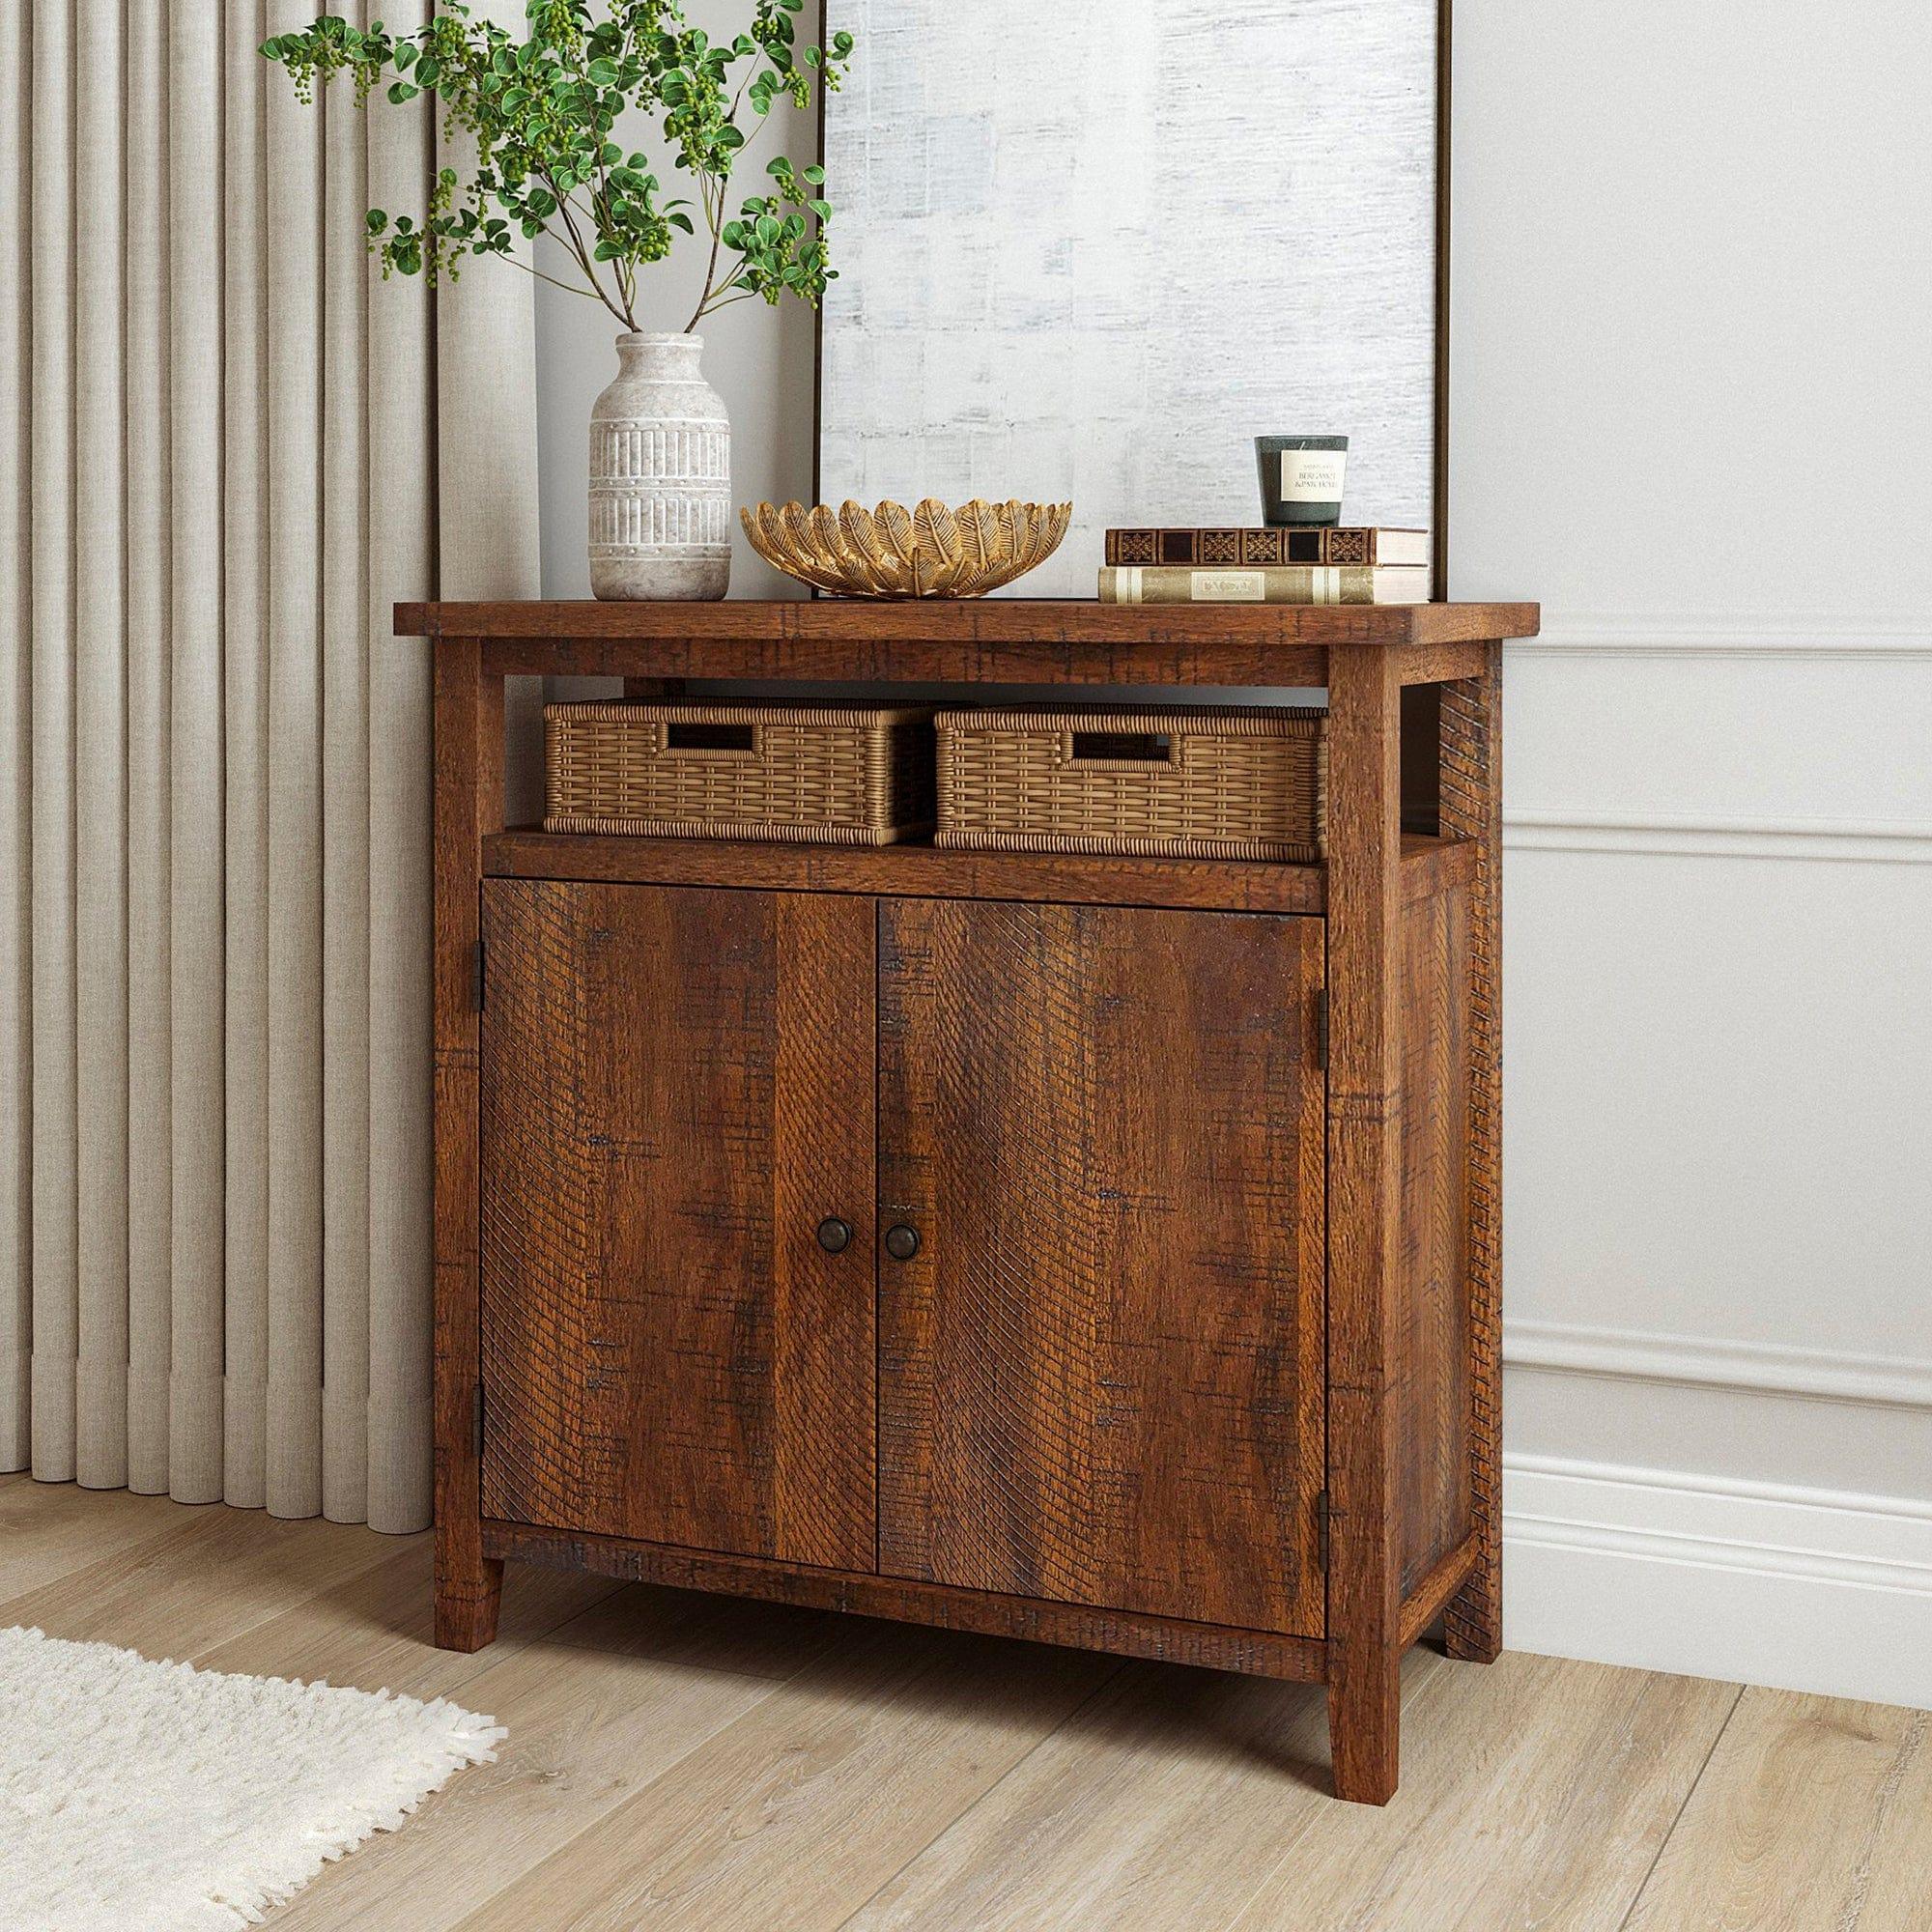 Shop Xavier Rough Sawn Natural Wood Console Cabinet Mademoiselle Home Decor